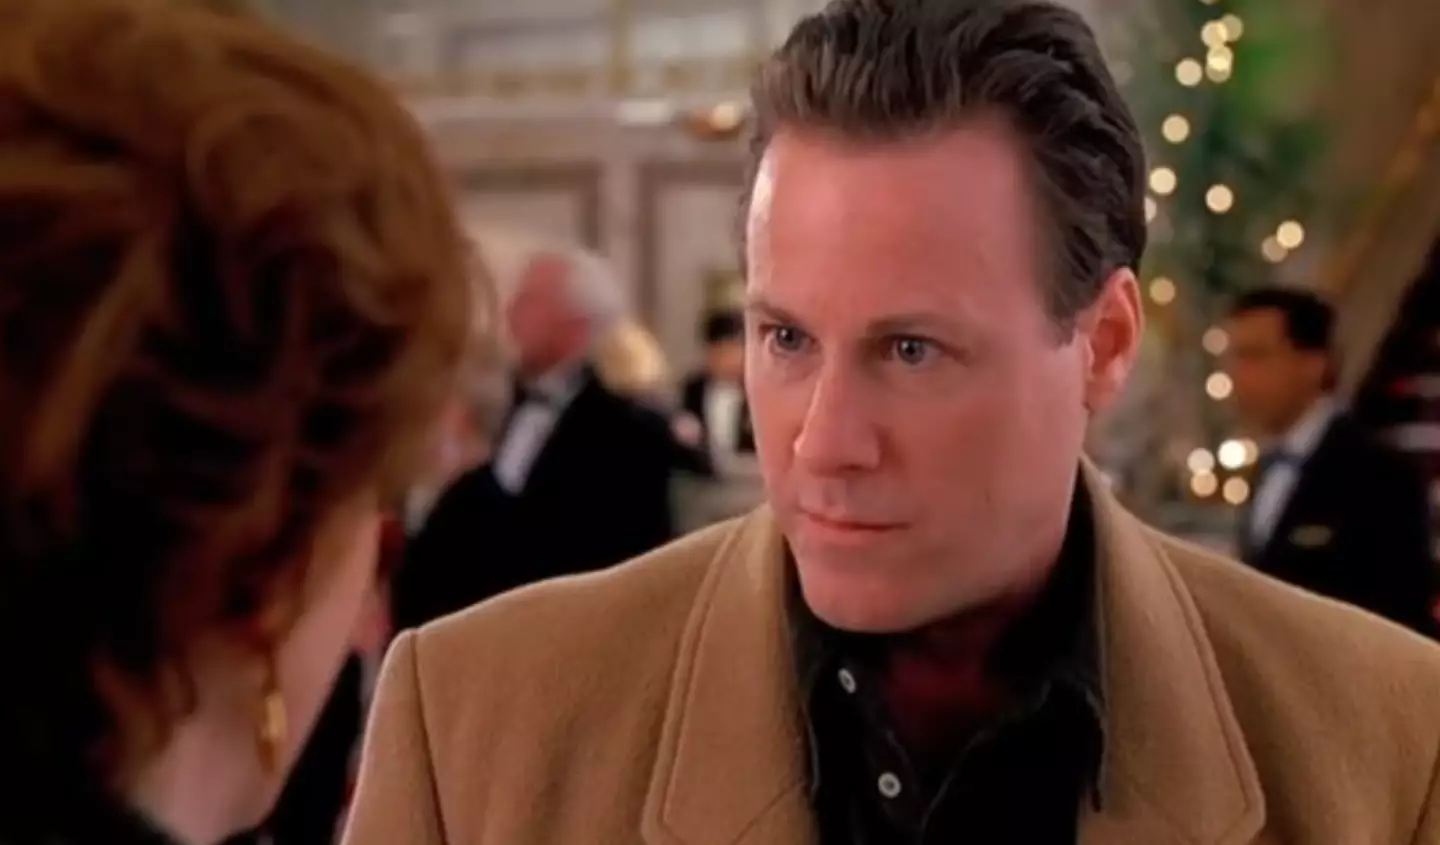 Viewers have questions about where Peter McCallister’s money came from.